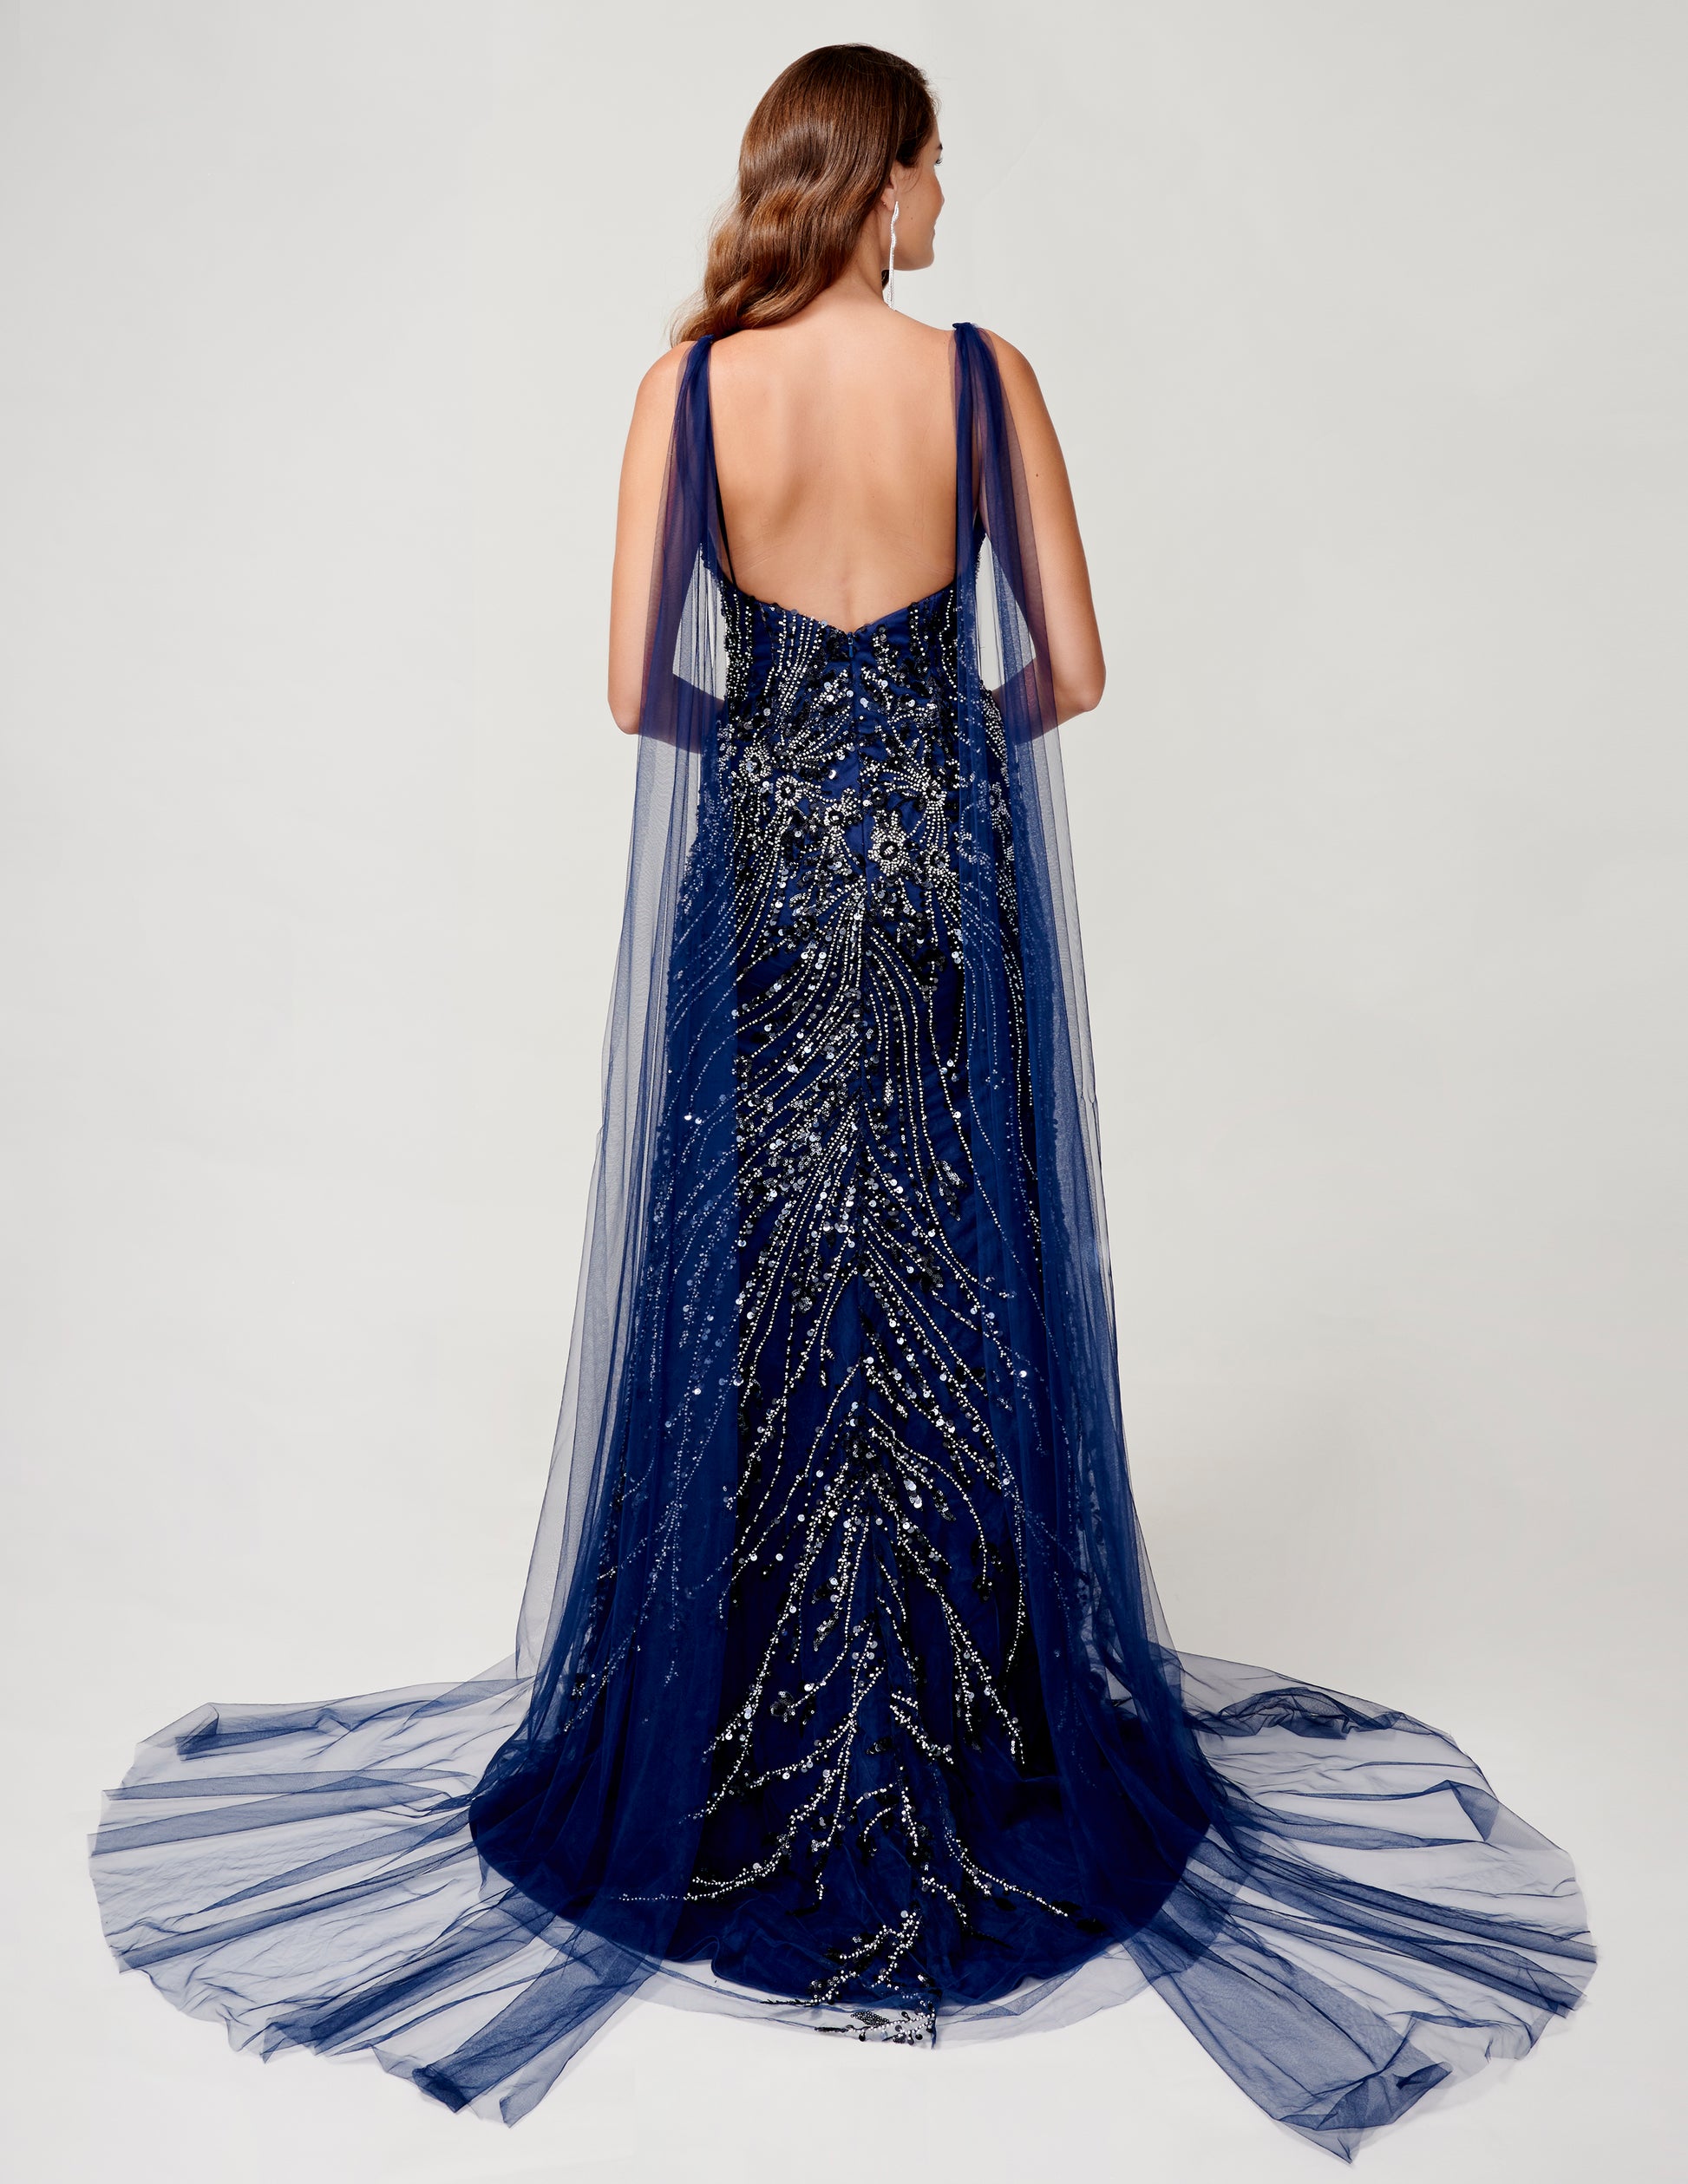 <p data-mce-fragment="1">Slip into elegance with the Nina Canacci 9153 Size 6 Navy Beaded Cape Dress. Featuring a fitted silhouette and a stunning beaded cape, this formal gown will make you stand out at any pageant or evening event. The slit adds a touch of sophistication while the capes bring a unique and stylish element to this navy dress.</p> <p data-mce-fragment="1">Size: 6</p> <p data-mce-fragment="1">Colors: Navy</p>